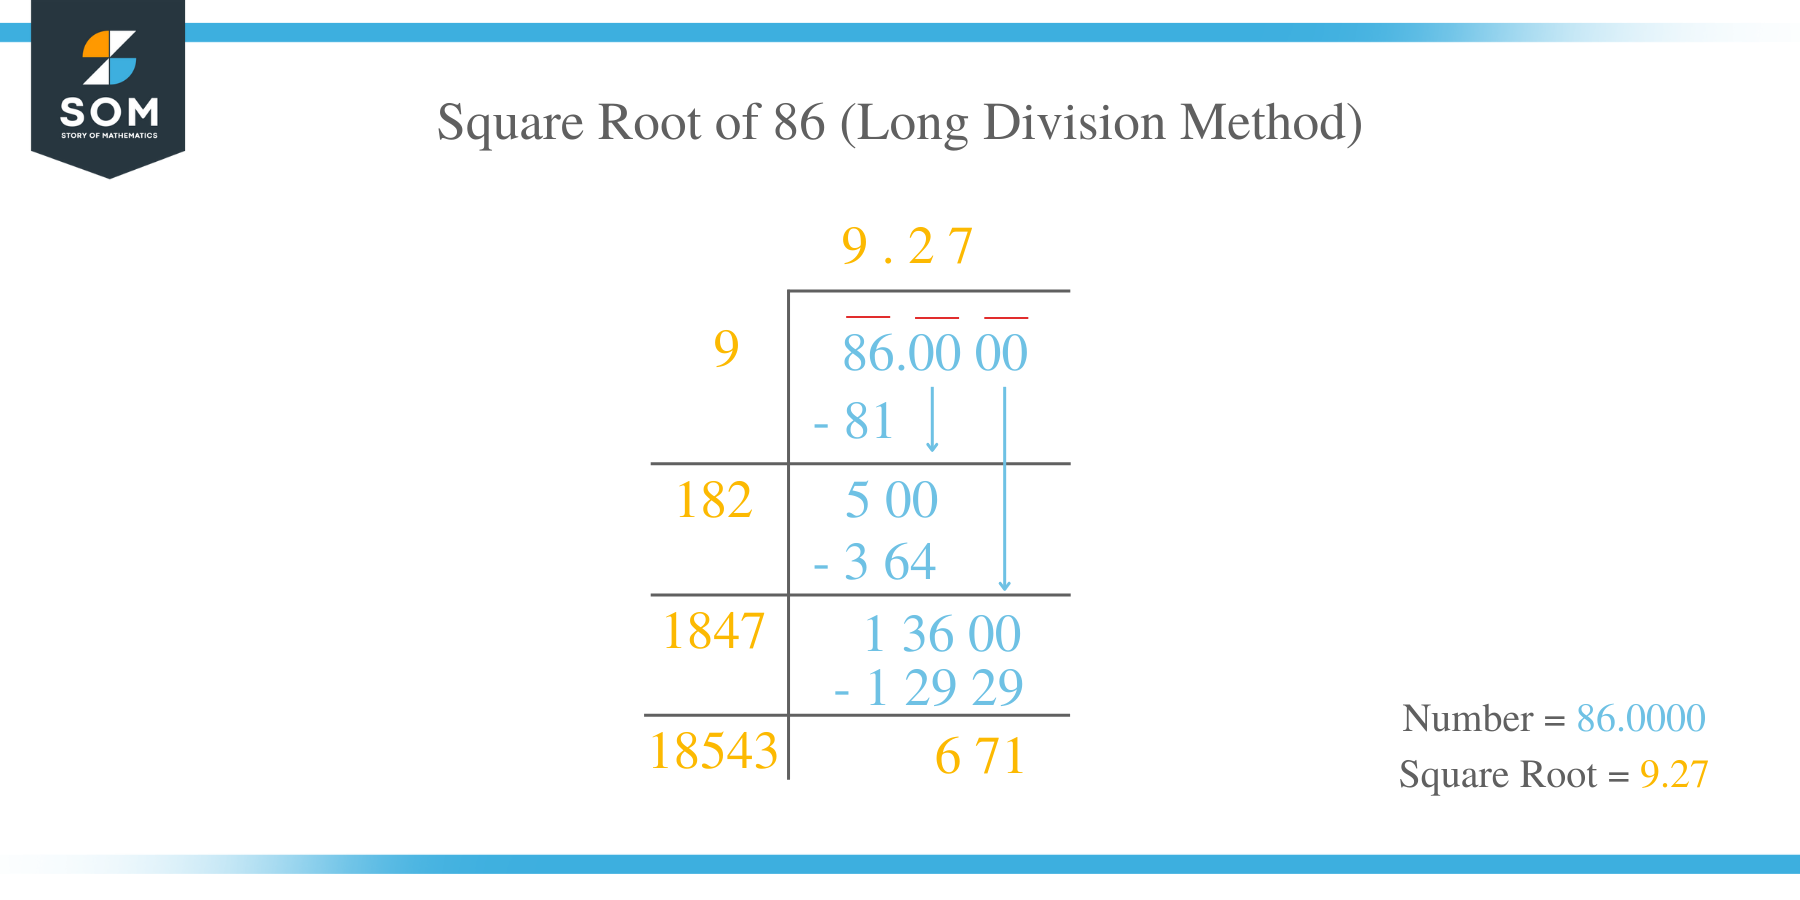 Square Root of 86 by Long Division Method